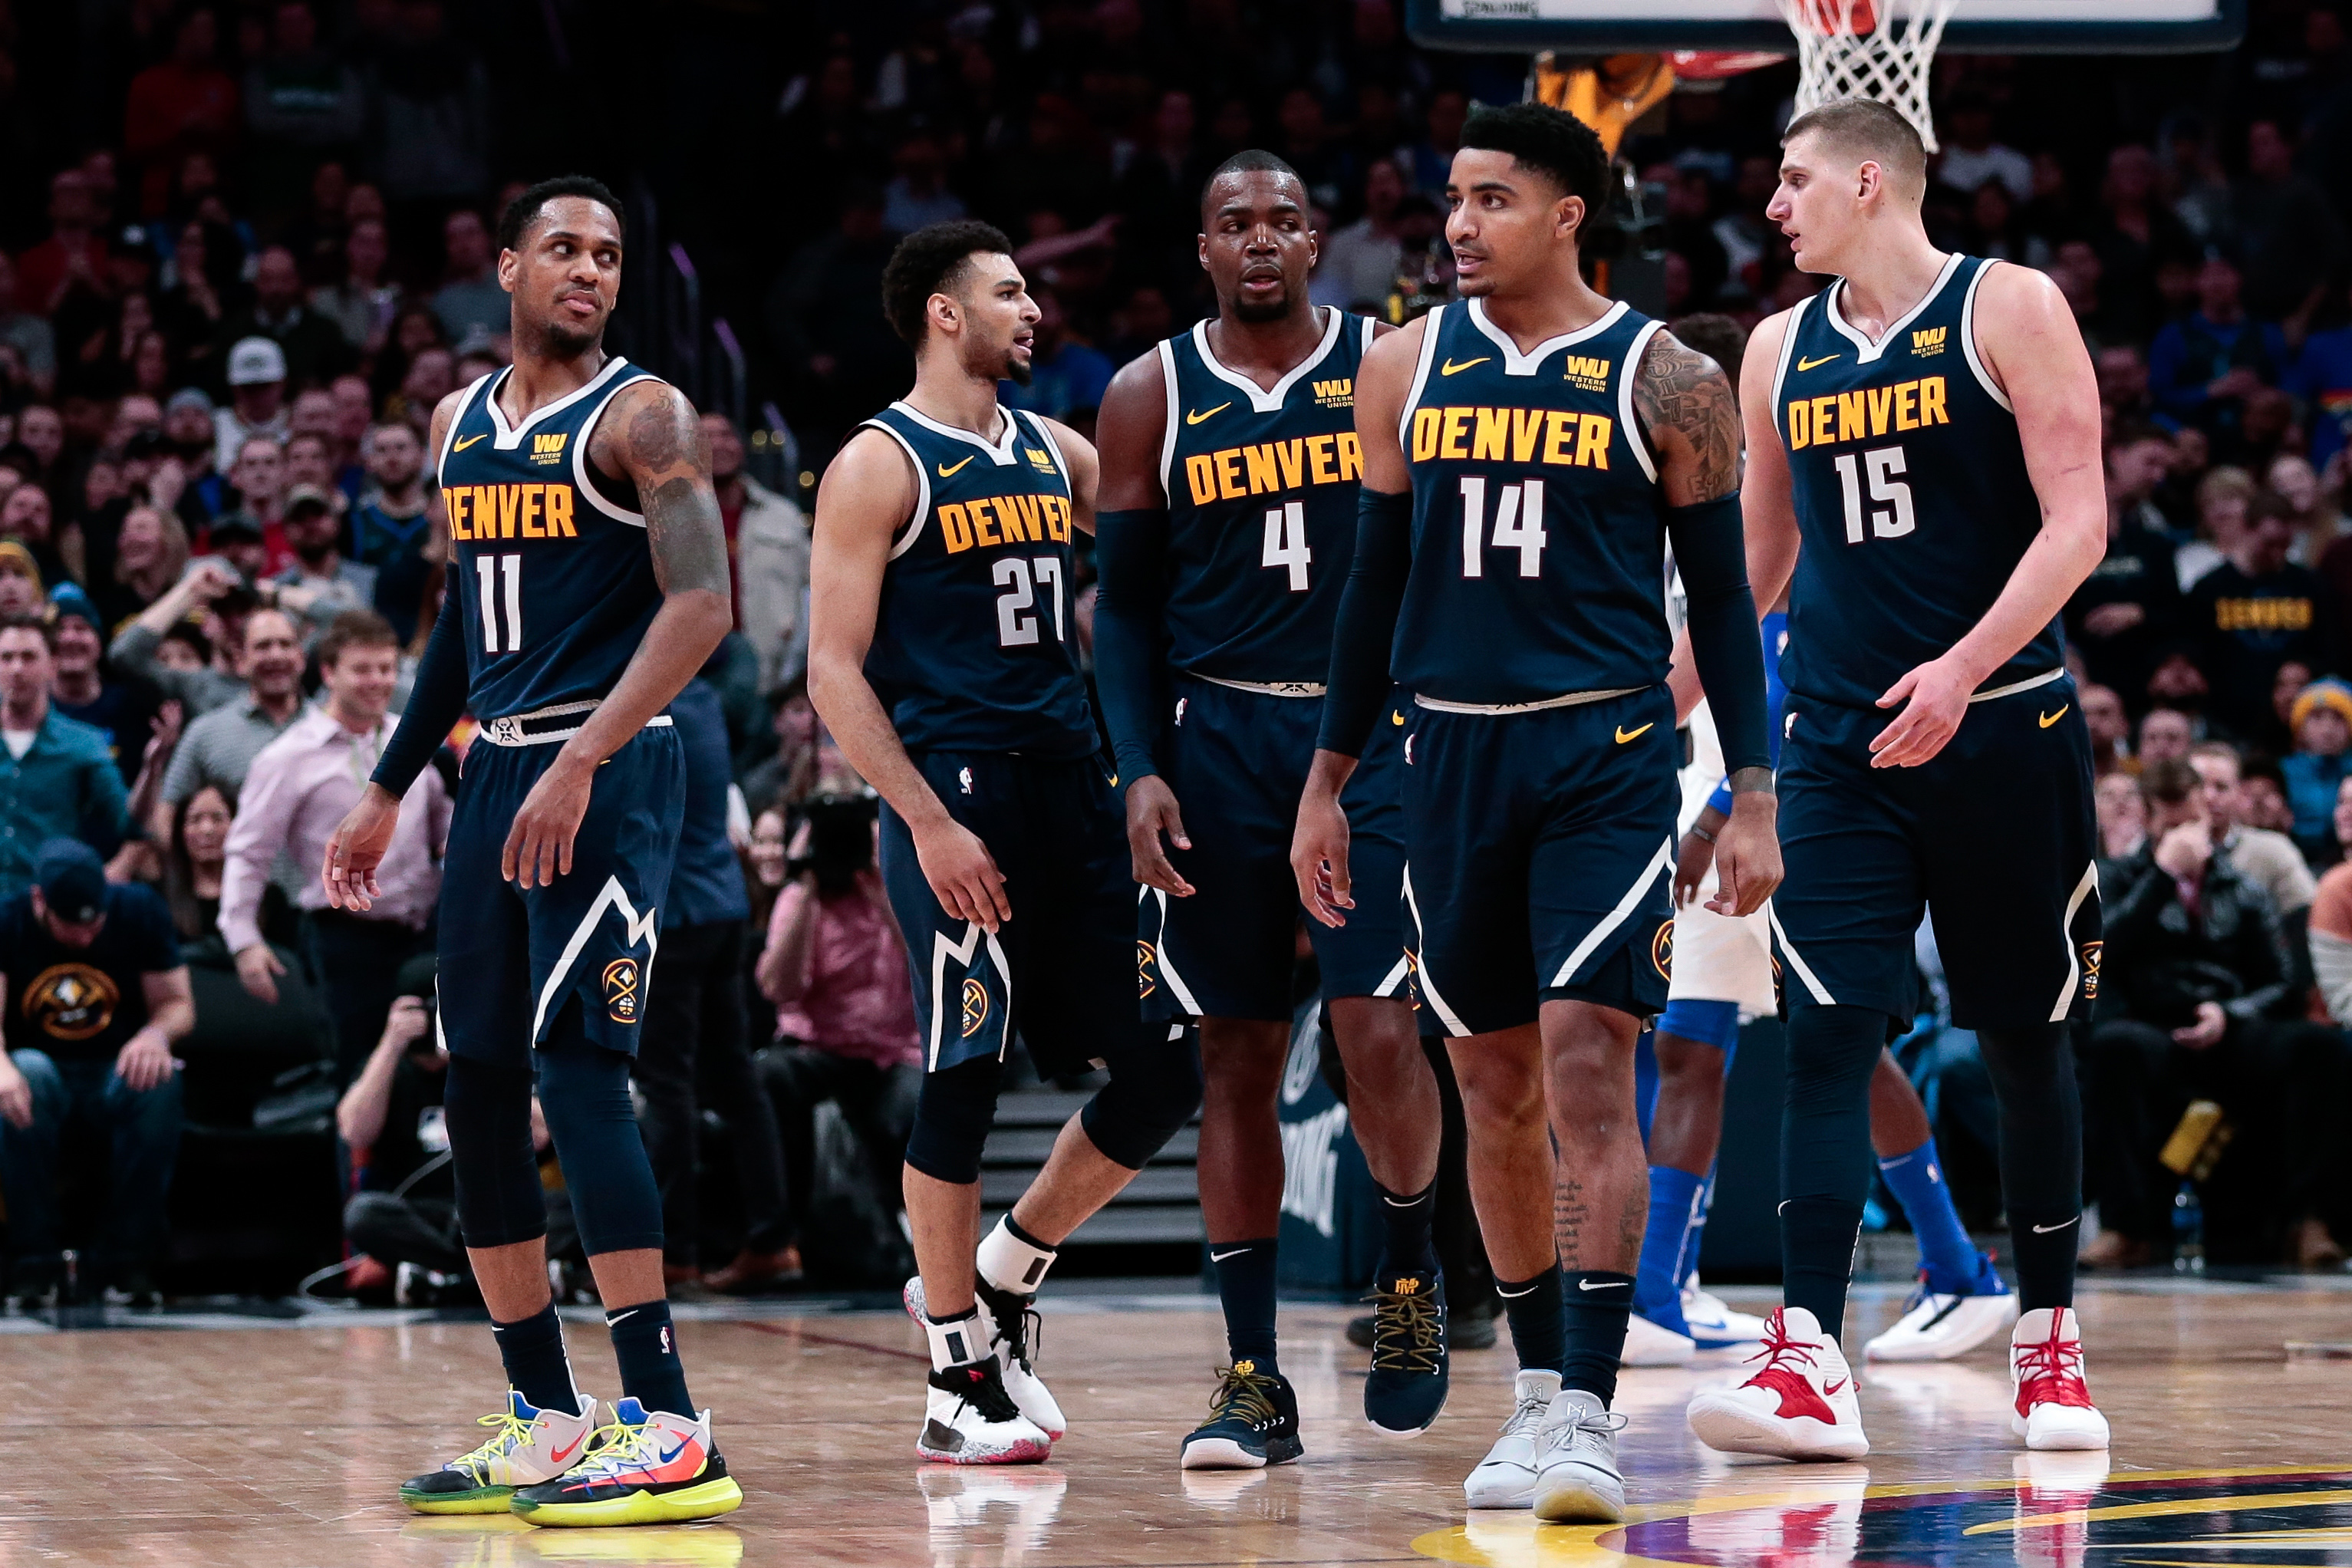 Denver Nuggets guard Monte Morris (11) and guard Jamal Murray (27) and forward Paul Millsap (4) and guard Gary Harris (14) and center Nikola Jokic (15) in the fourth quarter against the Dallas Mavericks at the Pepsi Center.